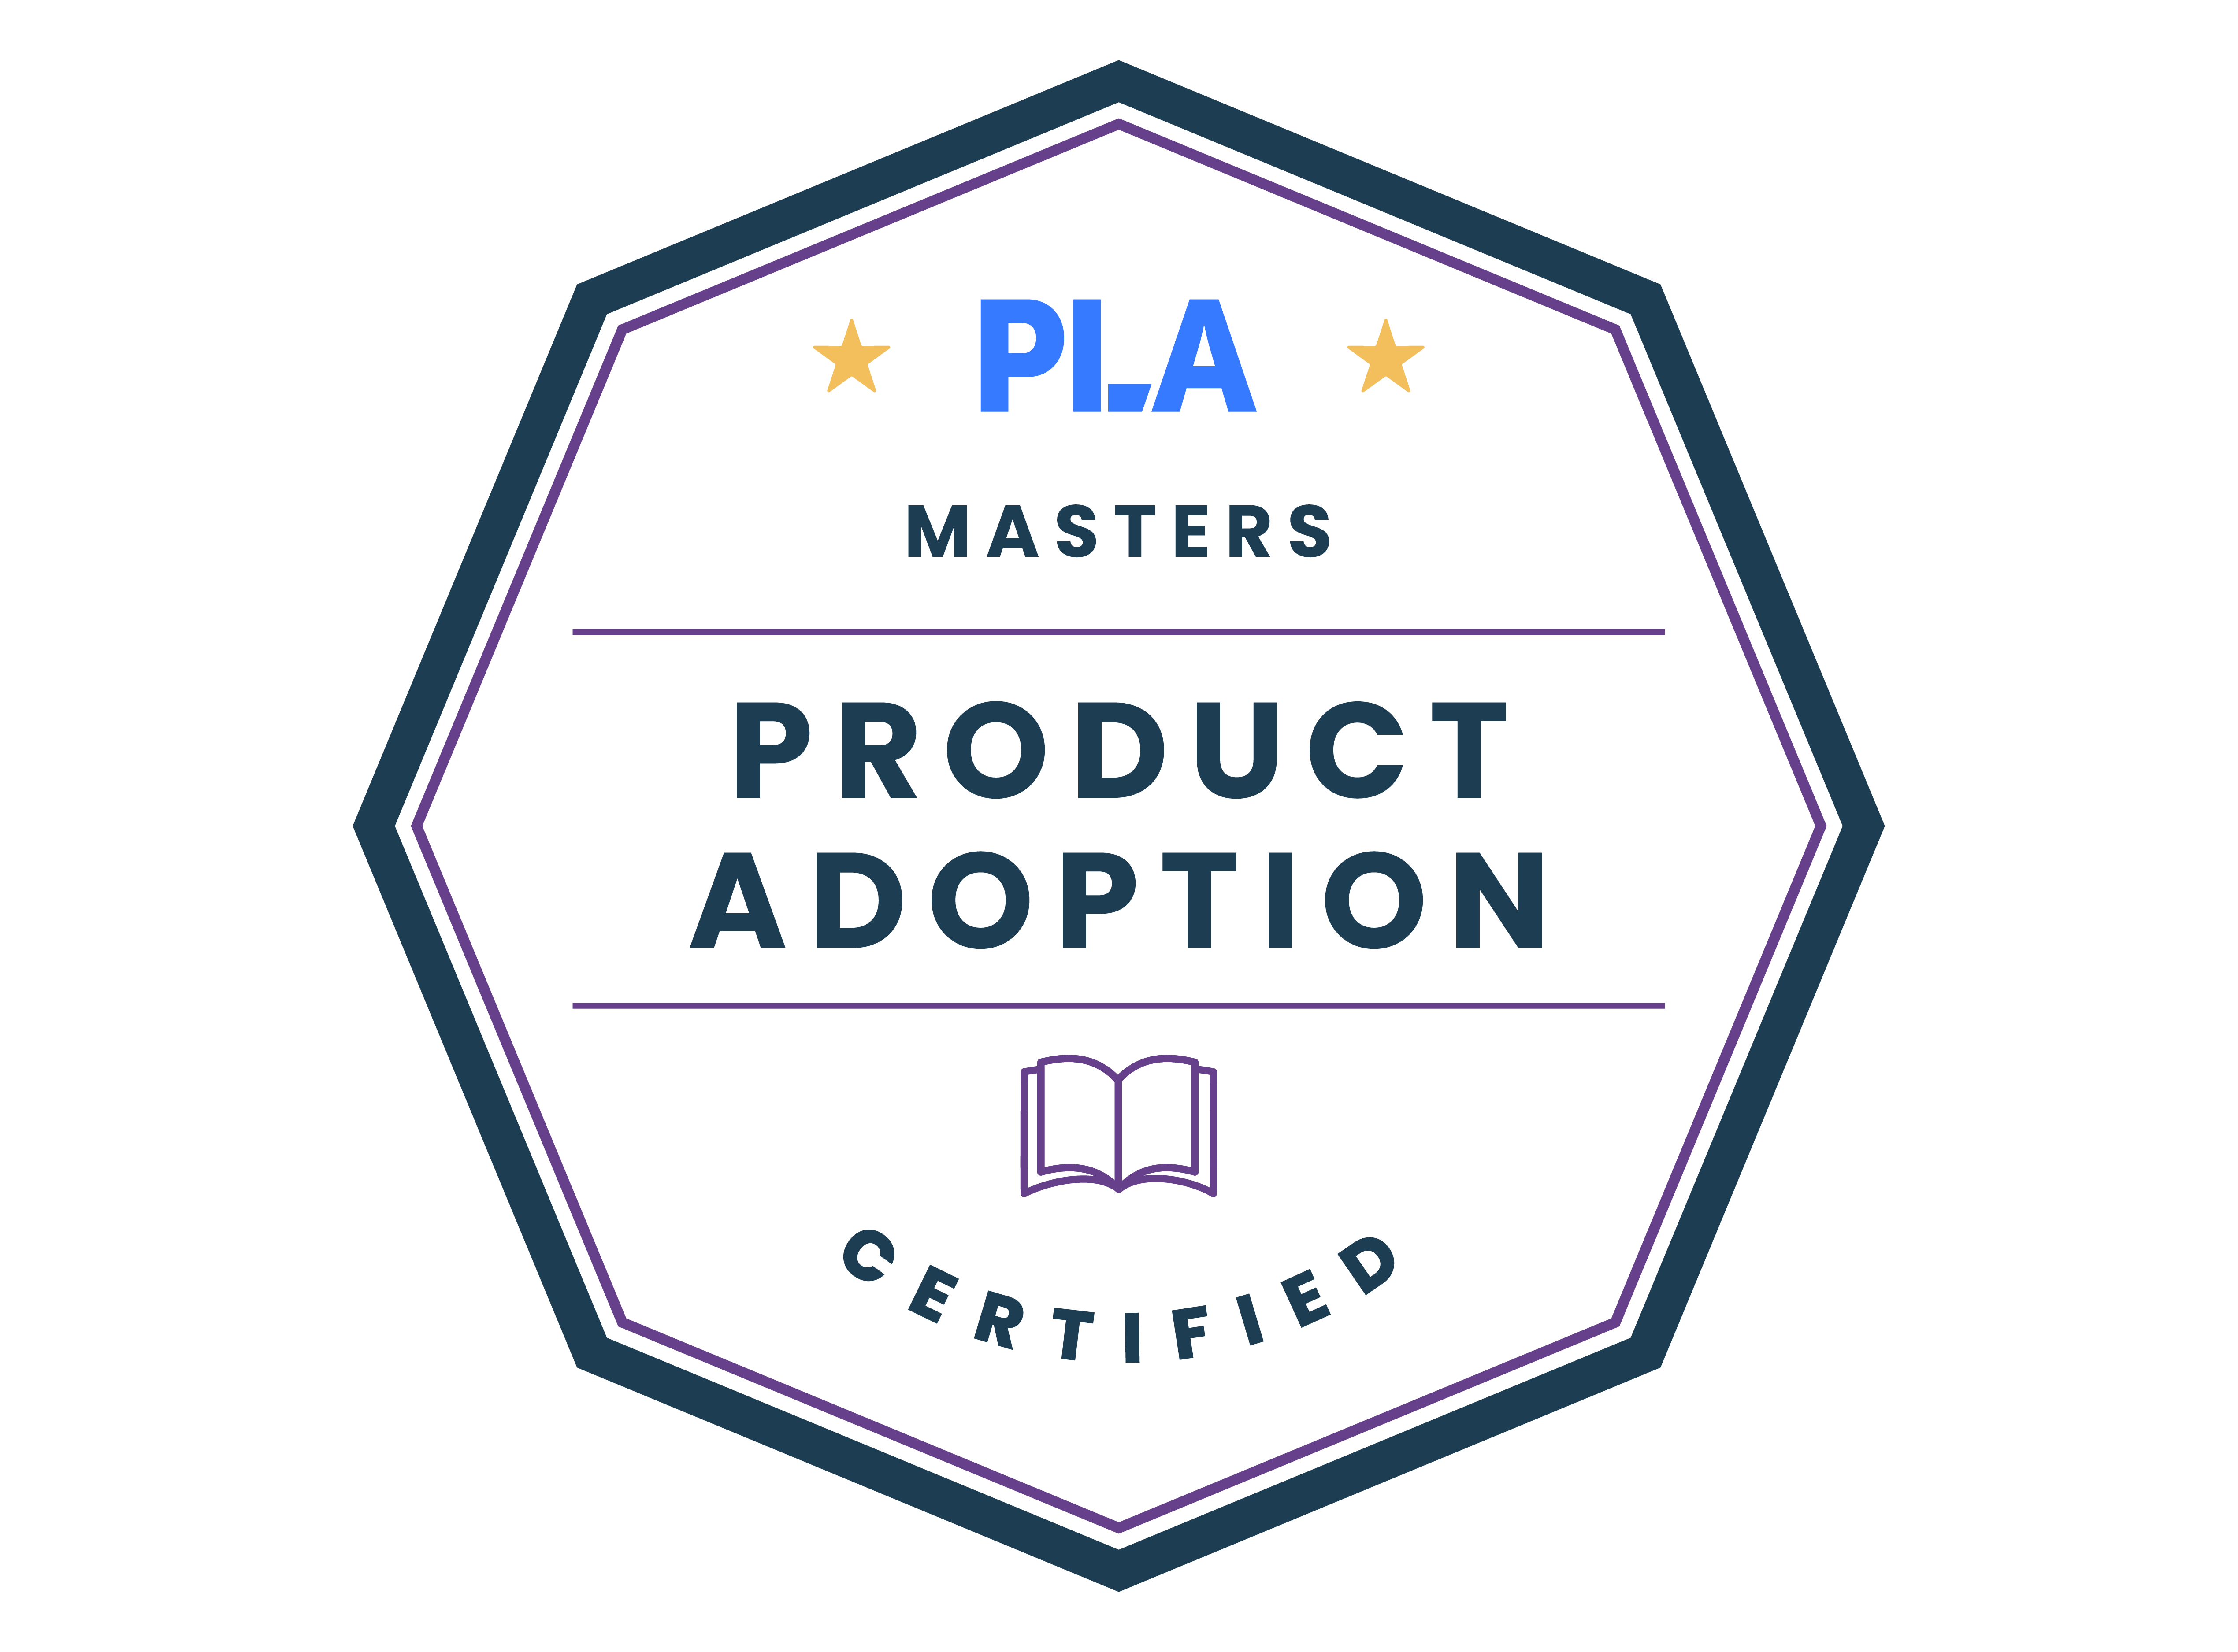 Product Adoption Certified badge